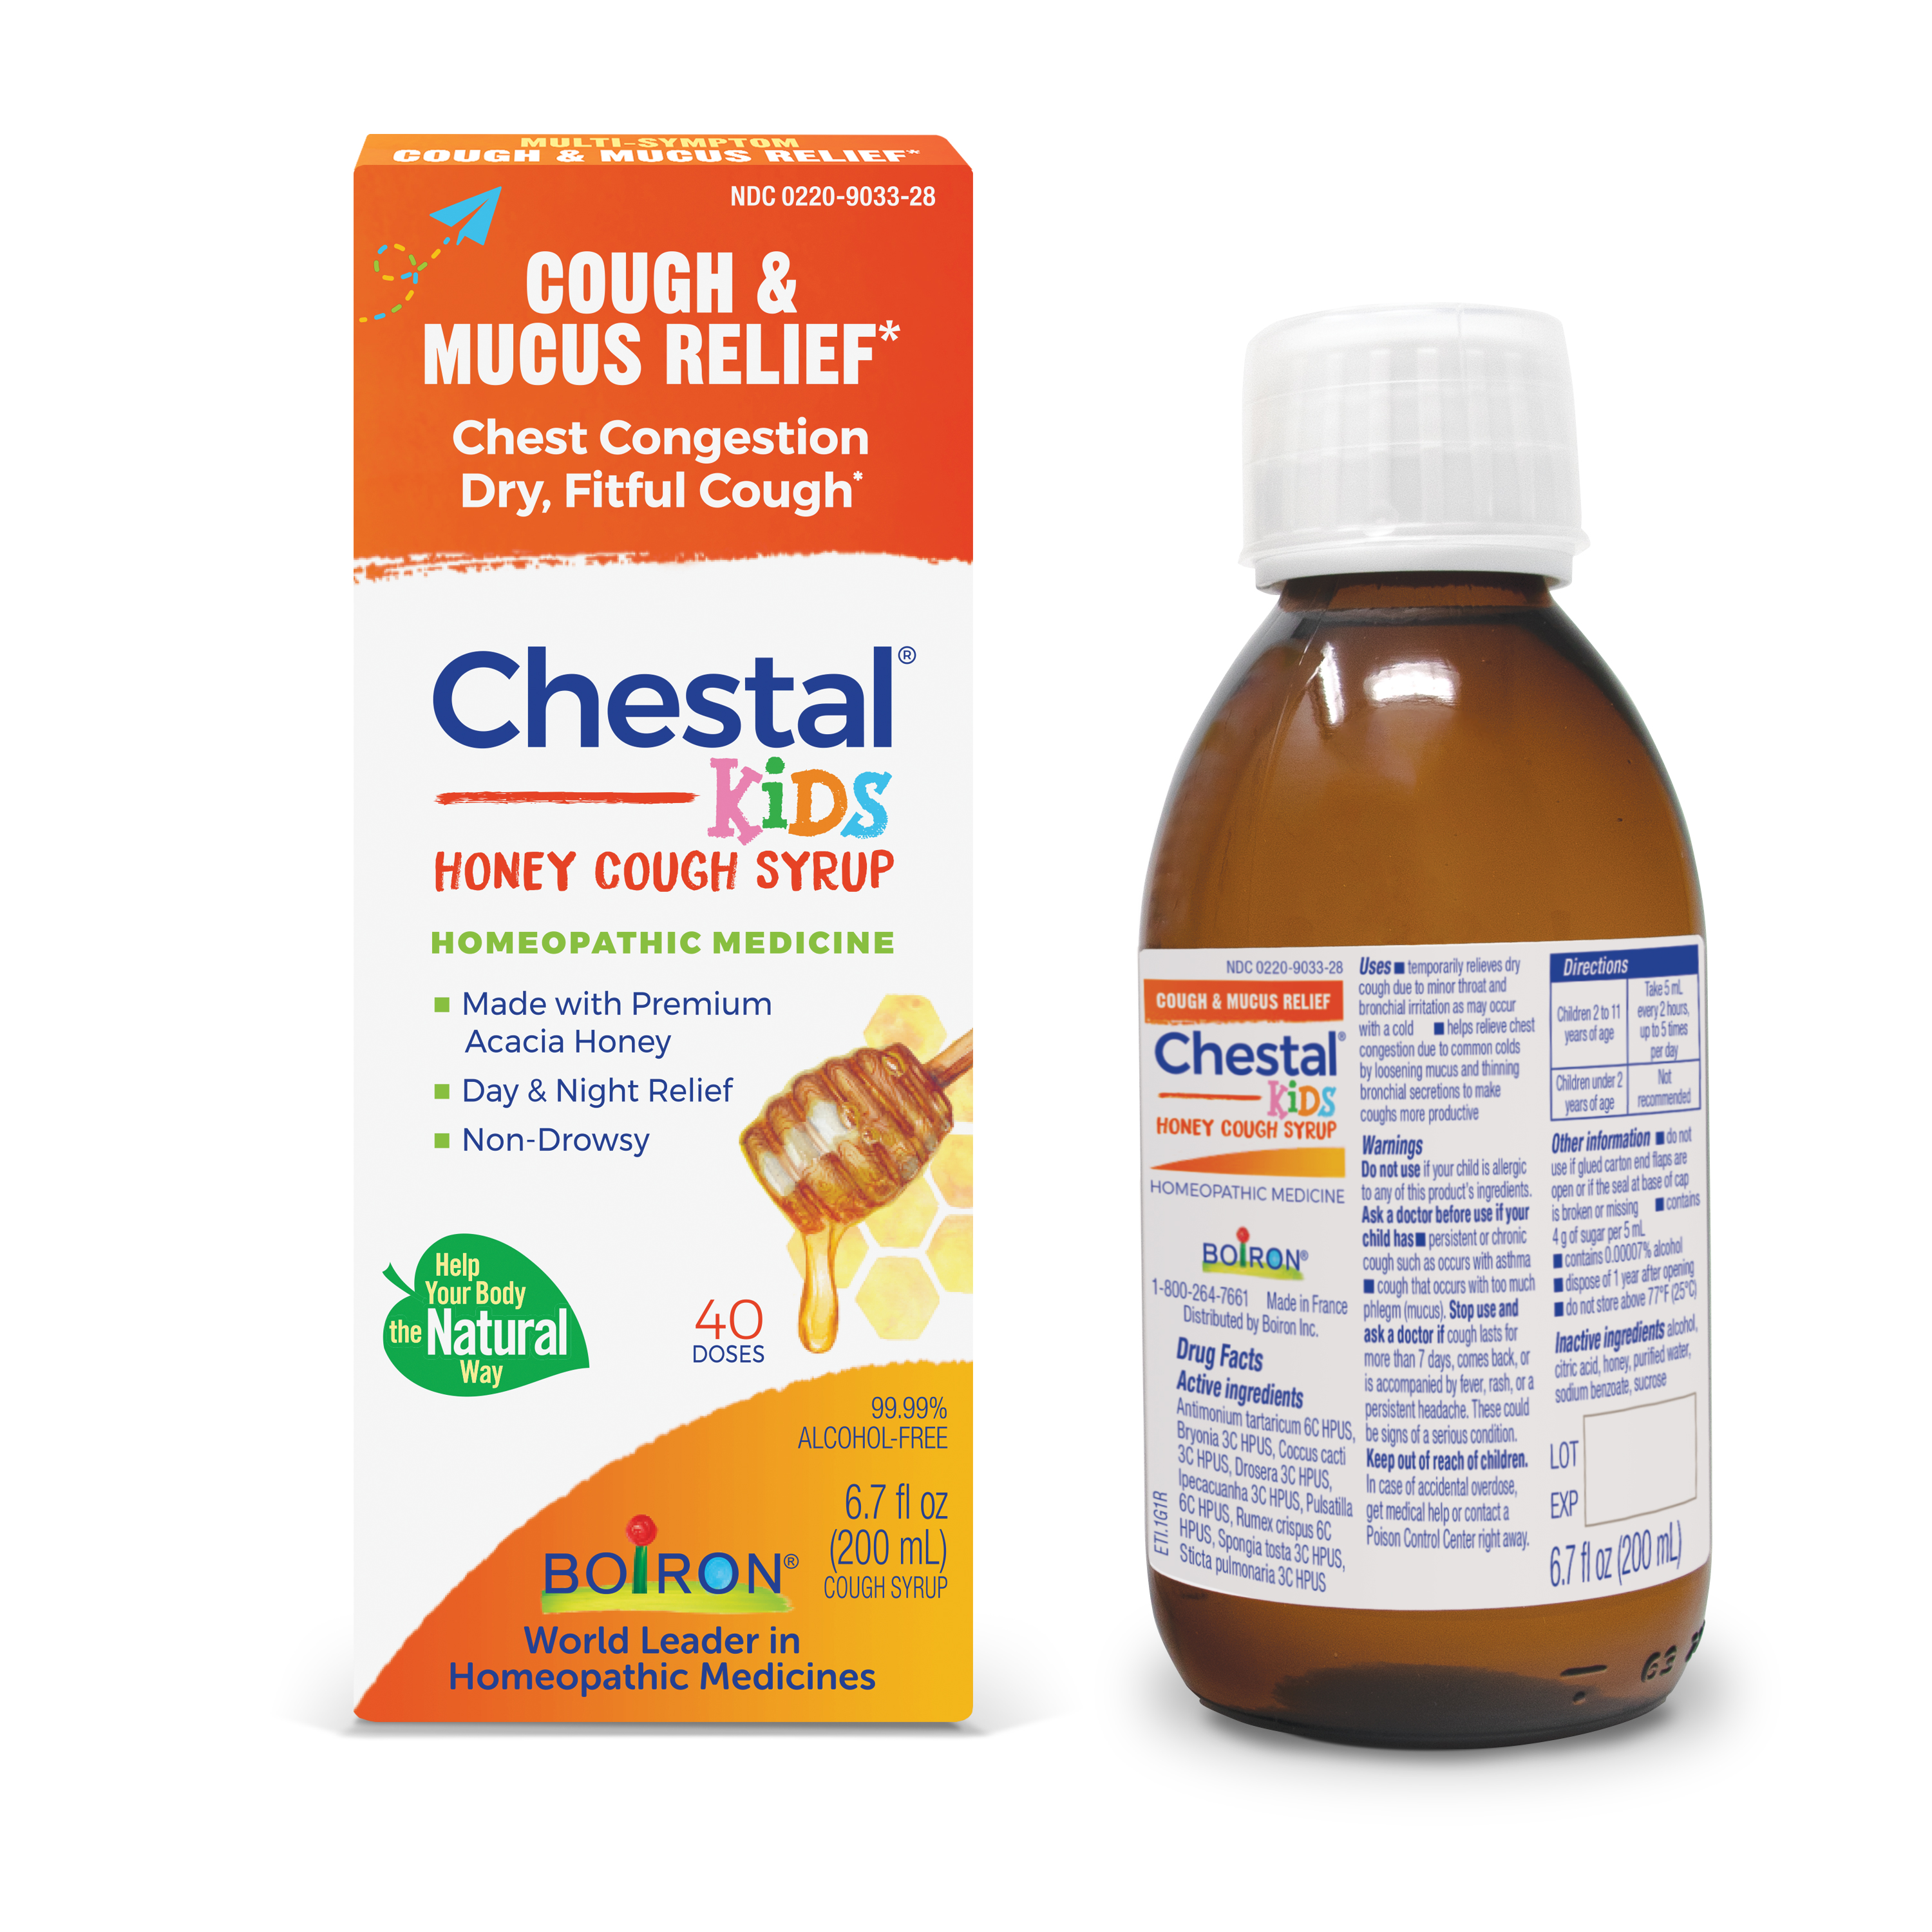 Boiron Chestal Kids Cough Syrup , Homeopathic Medicine for Cold & Cough Relief, Multi-Symptom Formula, Nasal & Chest Congestion, Runny Nose, 6.7 fl oz - image 3 of 8